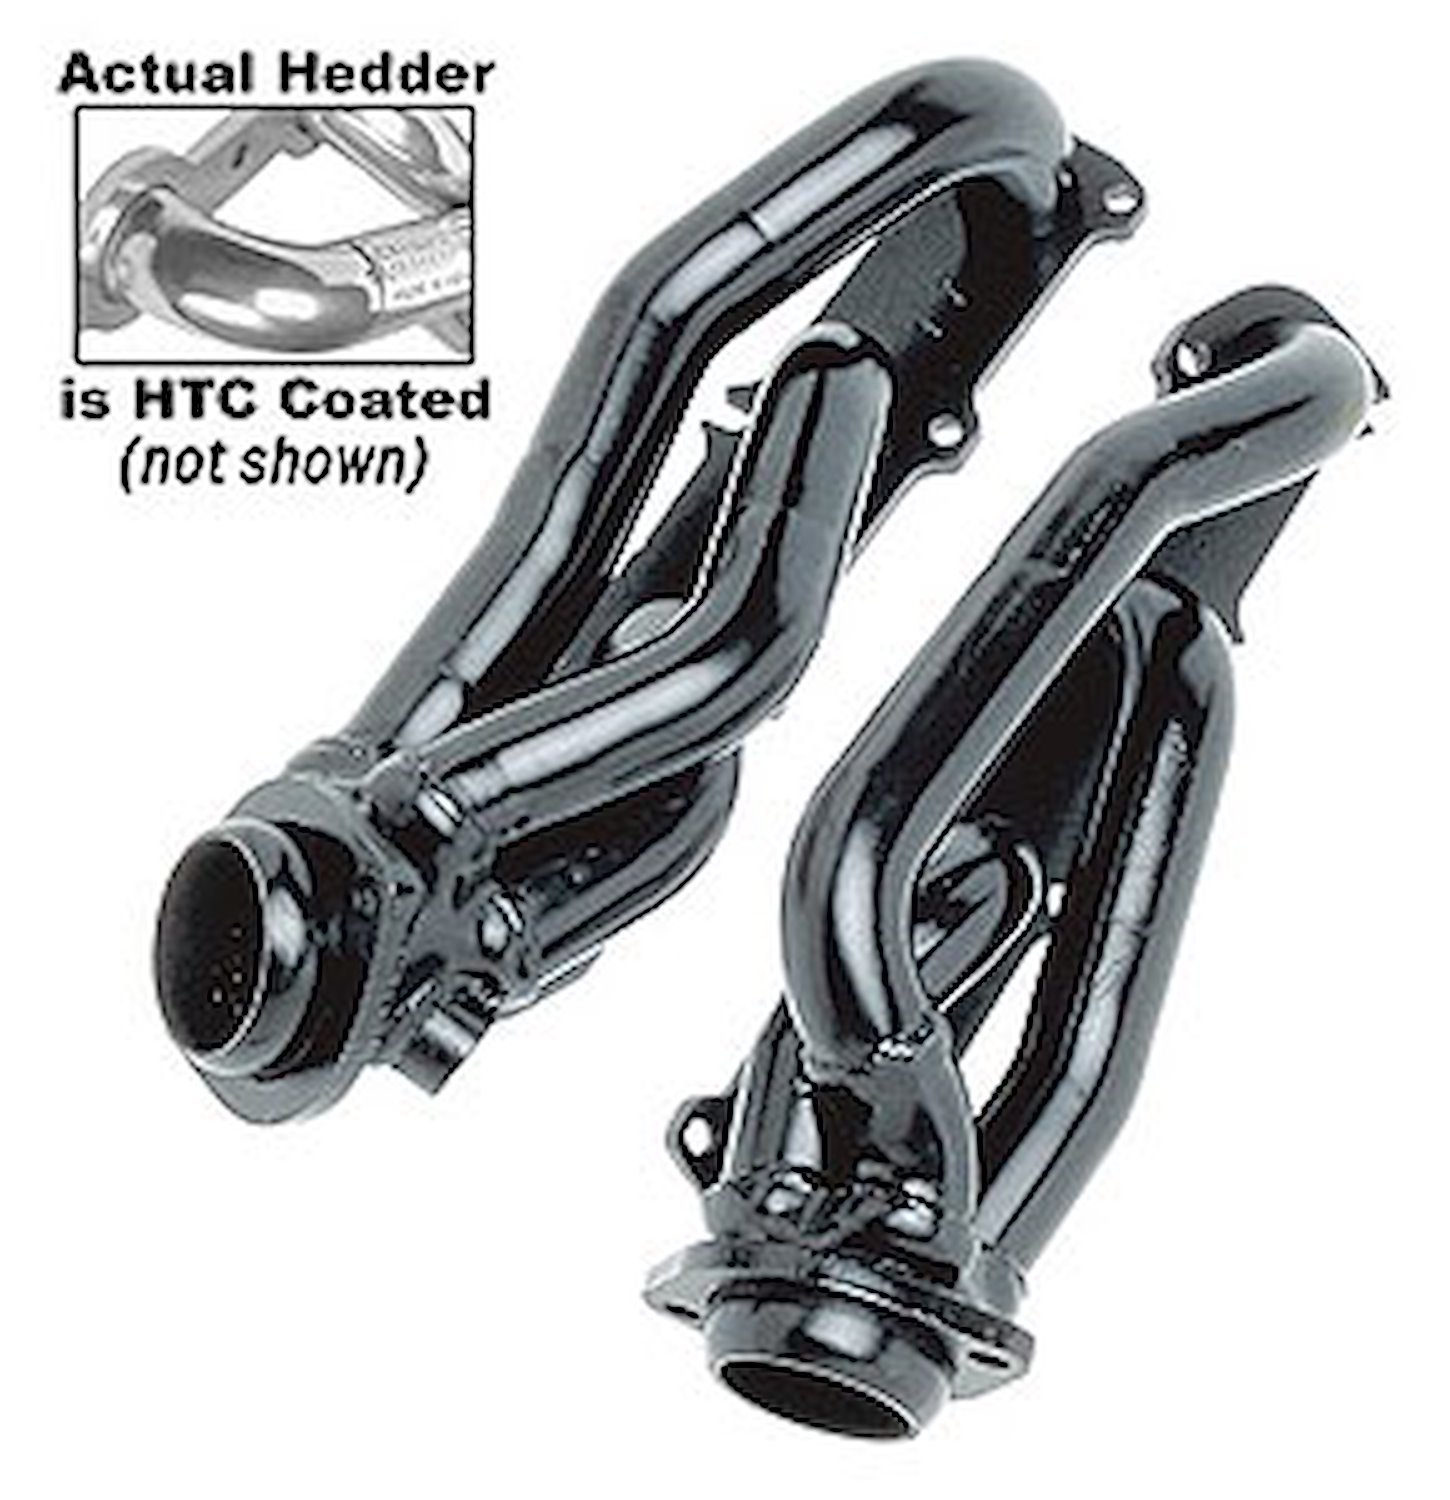 Standard Duty HTC Coated Shorty Headers 1997-04 Ford Truck/SUV 4.6L